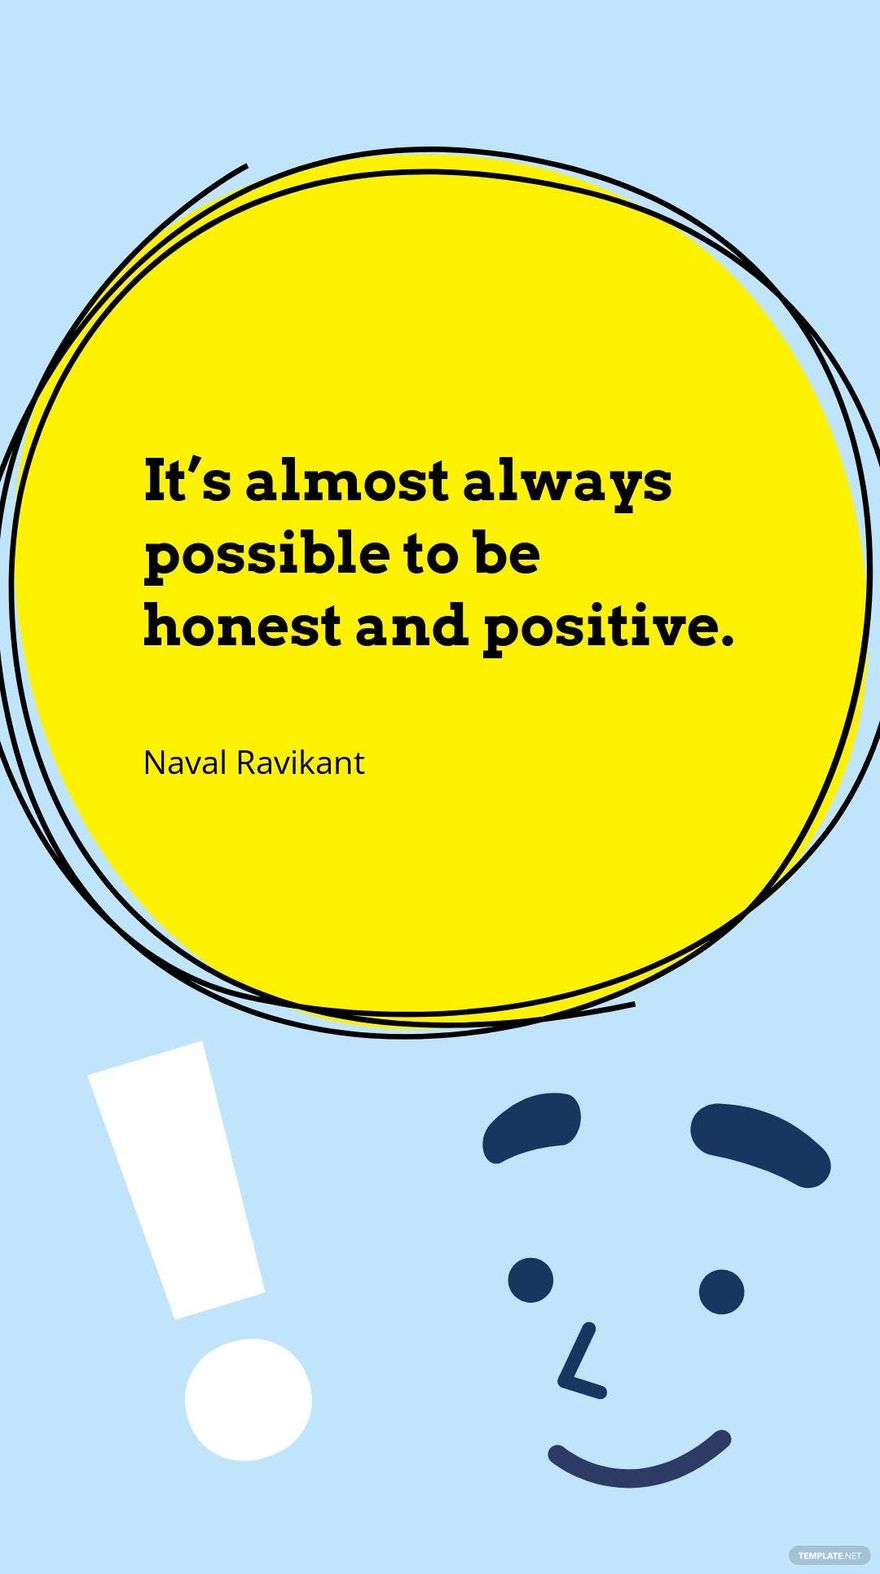 Naval Ravikant - It’s almost always possible to be honest and positive.